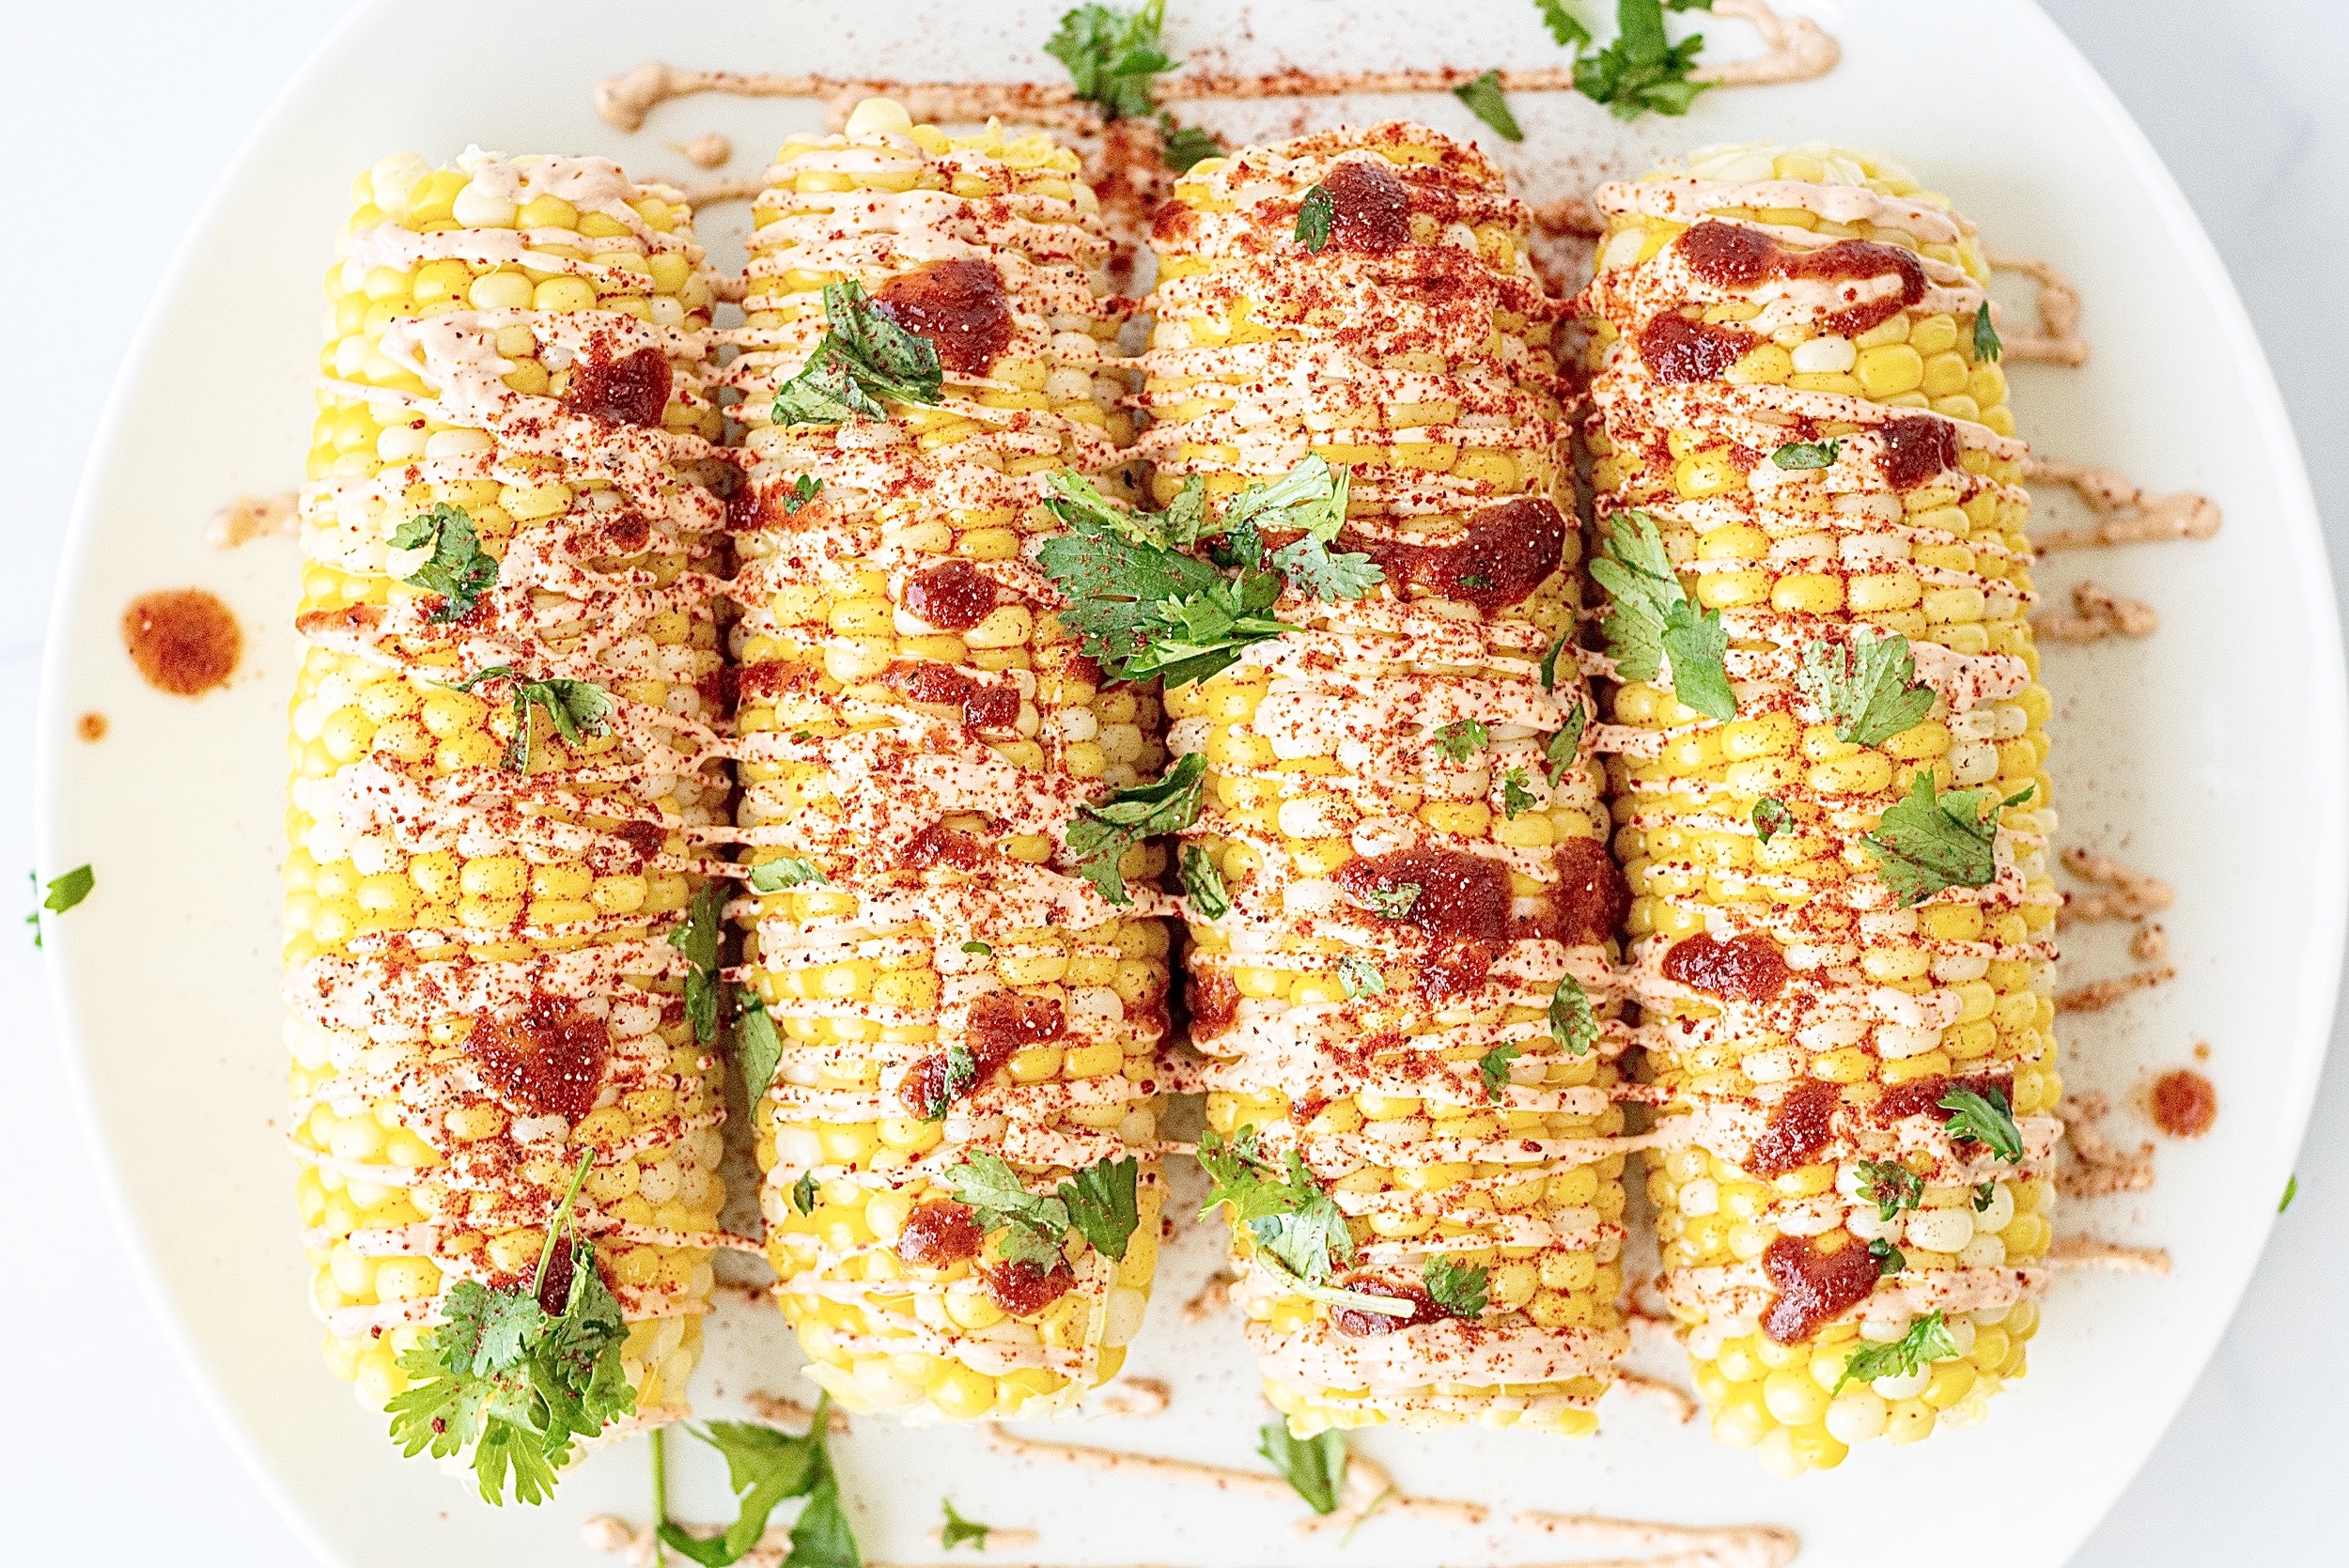 Spicy Mexican Corn on the Cob Picture